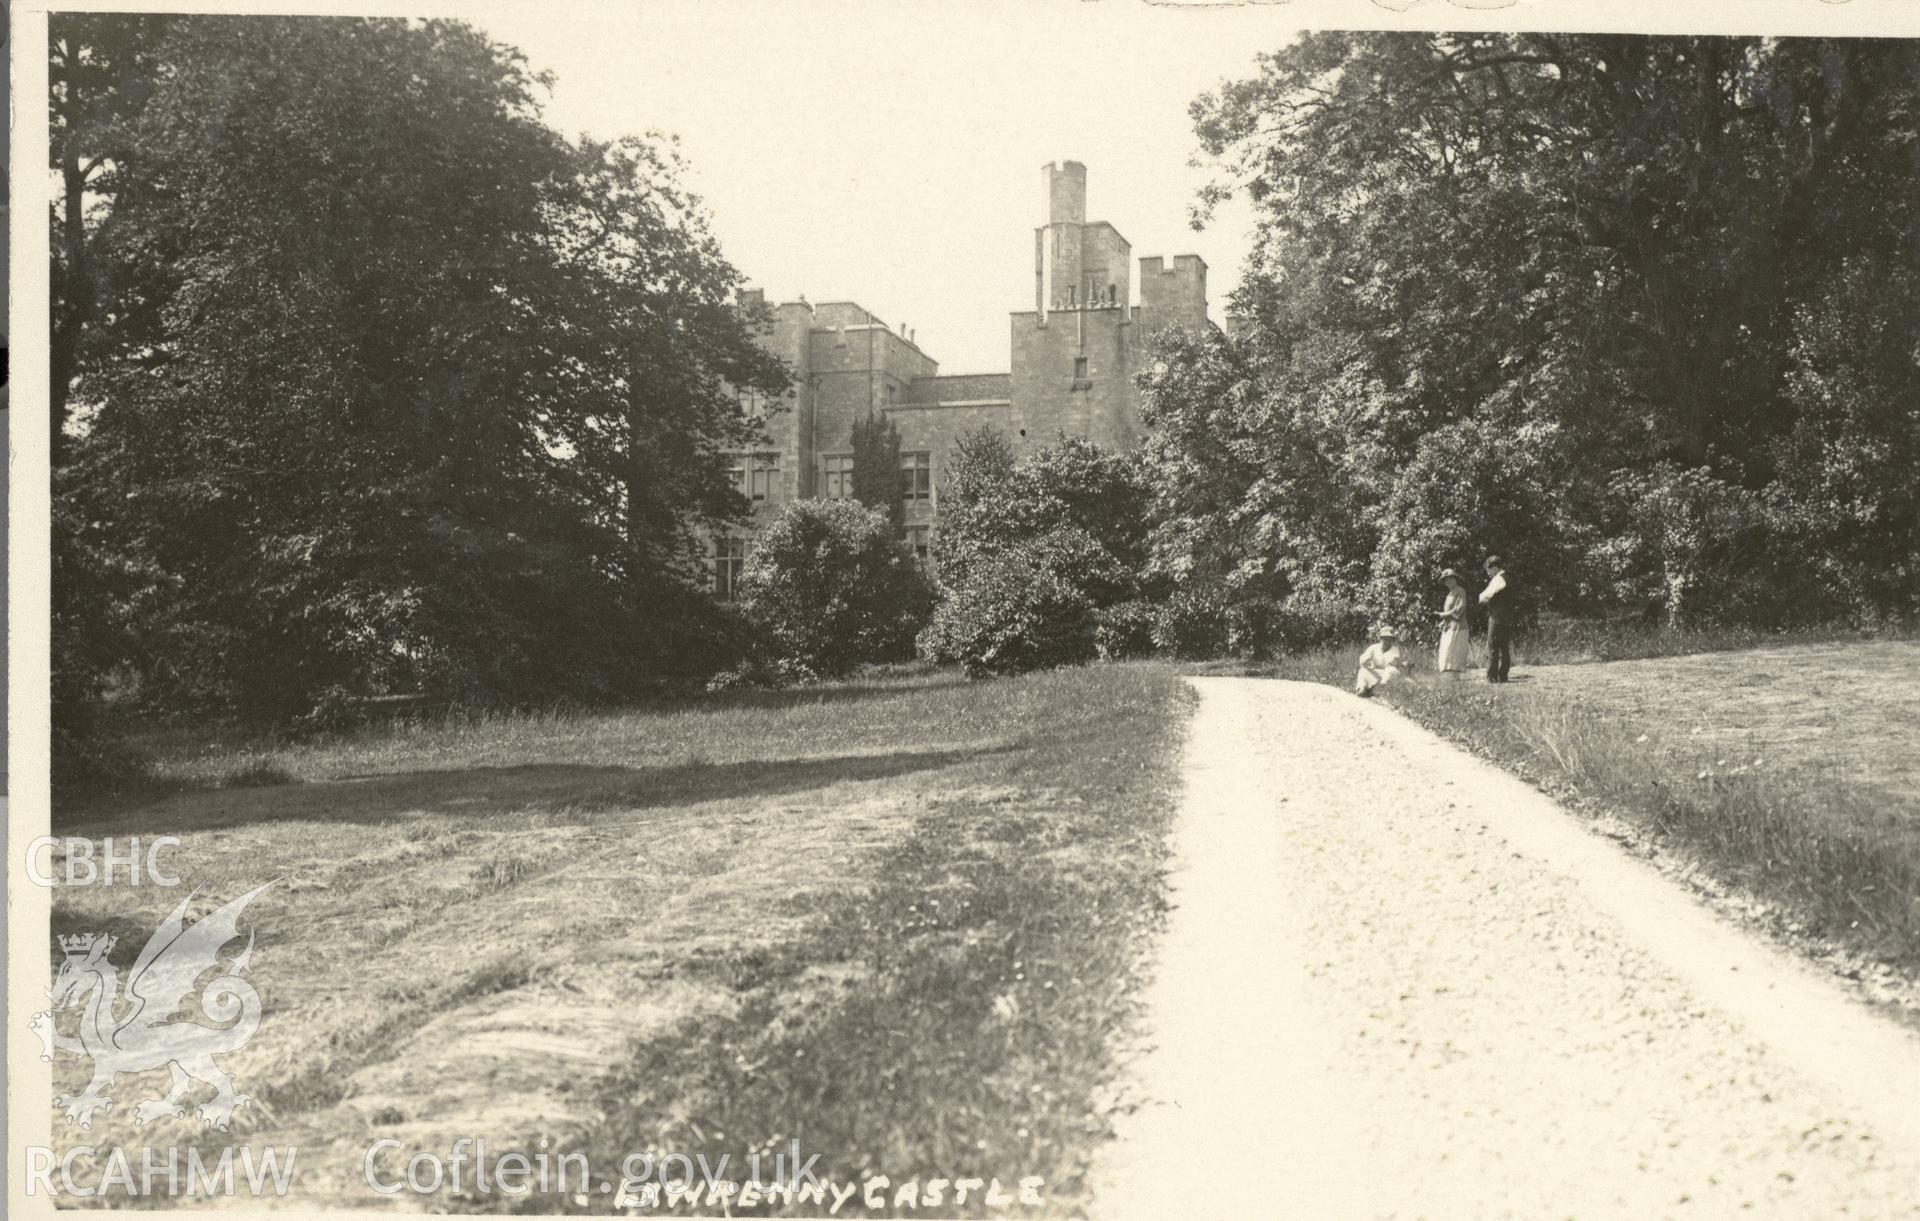 Digitised postcard image of Lawrenny Castle, S.J. Allen, Photographer, Pembroke Dock. Produced by Parks and Gardens Data Services, from an original item in the Peter Davis Collection at Parks and Gardens UK. We hold only web-resolution images of this collection, suitable for viewing on screen and for research purposes only. We do not hold the original images, or publication quality scans.